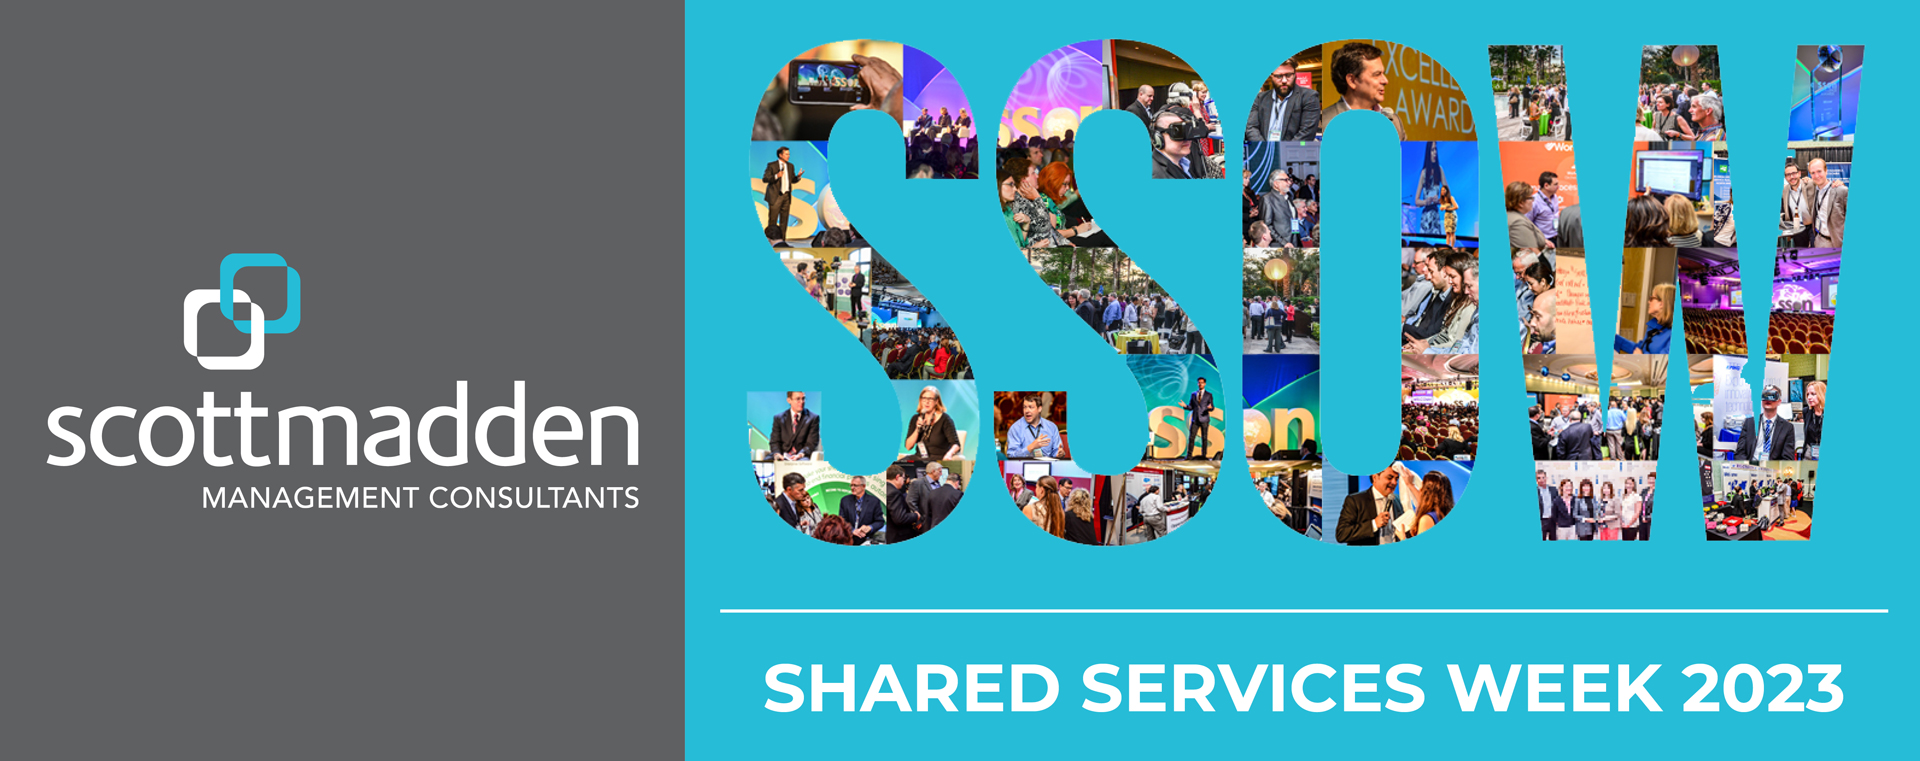 Shared Services & Outsourcing Week